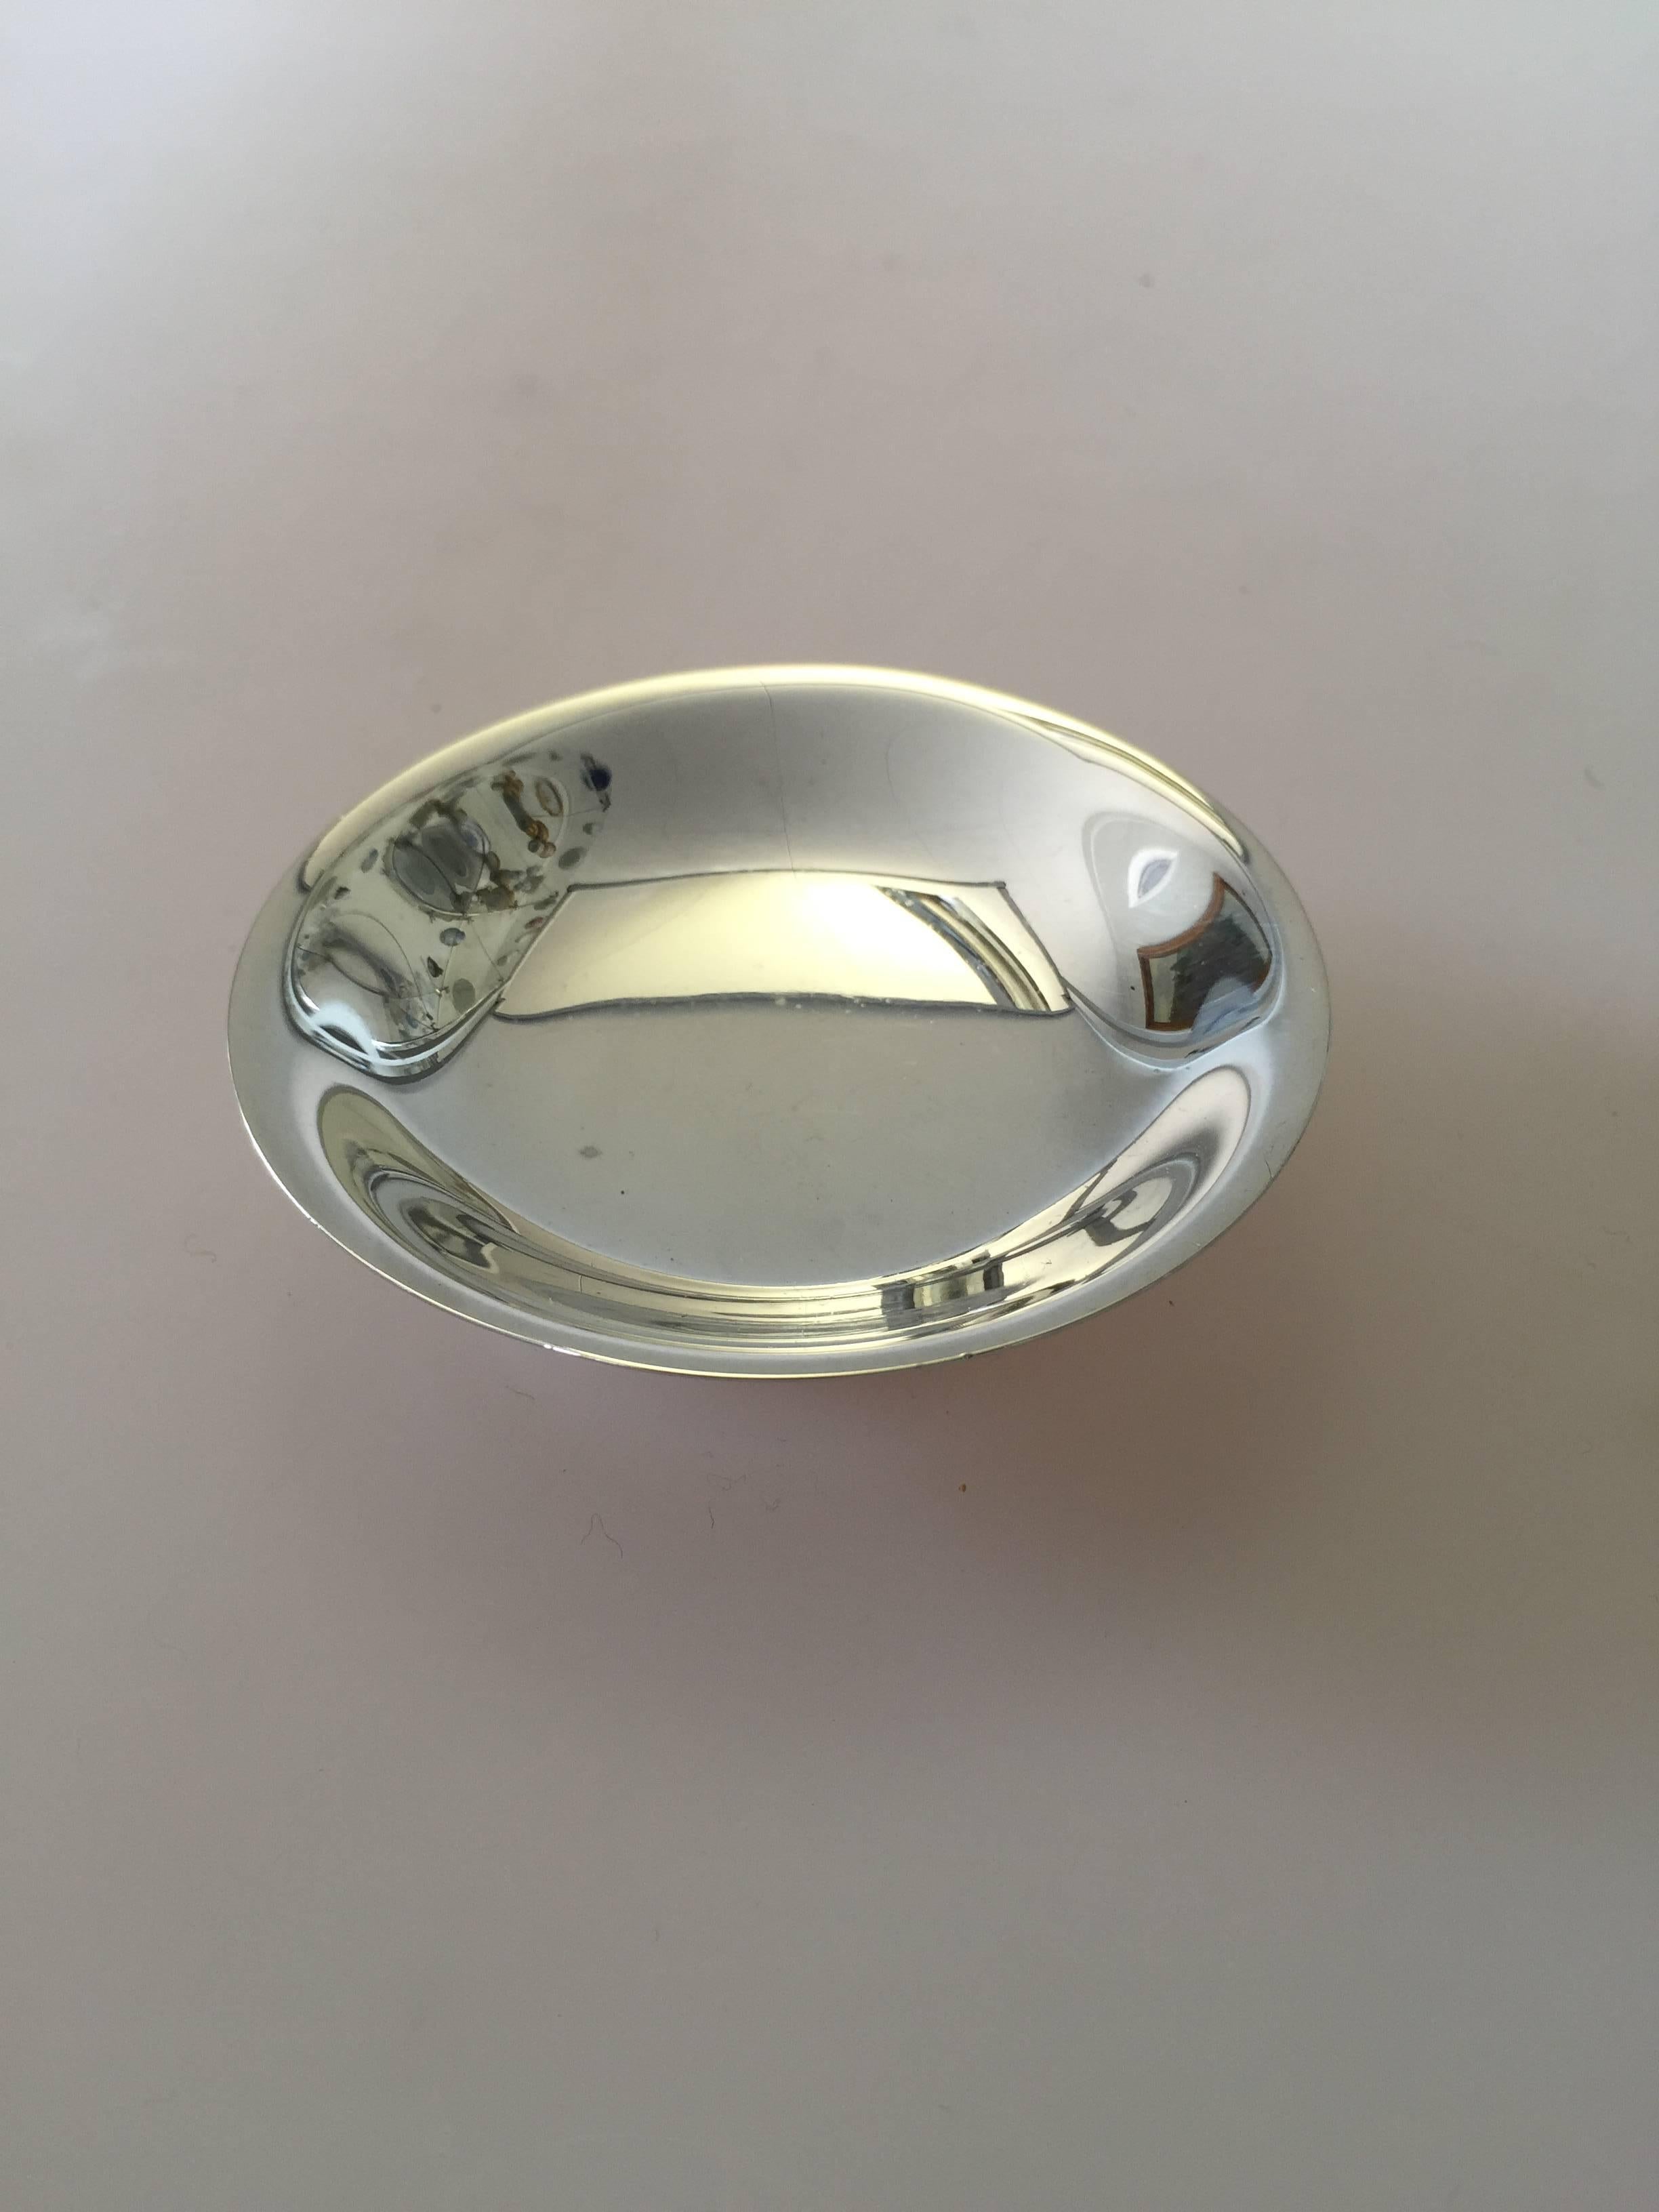 Georg Jensen sterling silver ash tray #639 designed by Harald Nielsen. The ash tray is also fit just as a small decorative bowl on your desk. It measures 7.5 cm and is in good a condition.

Harald Nielsen (1892-1977) was the originator of some of